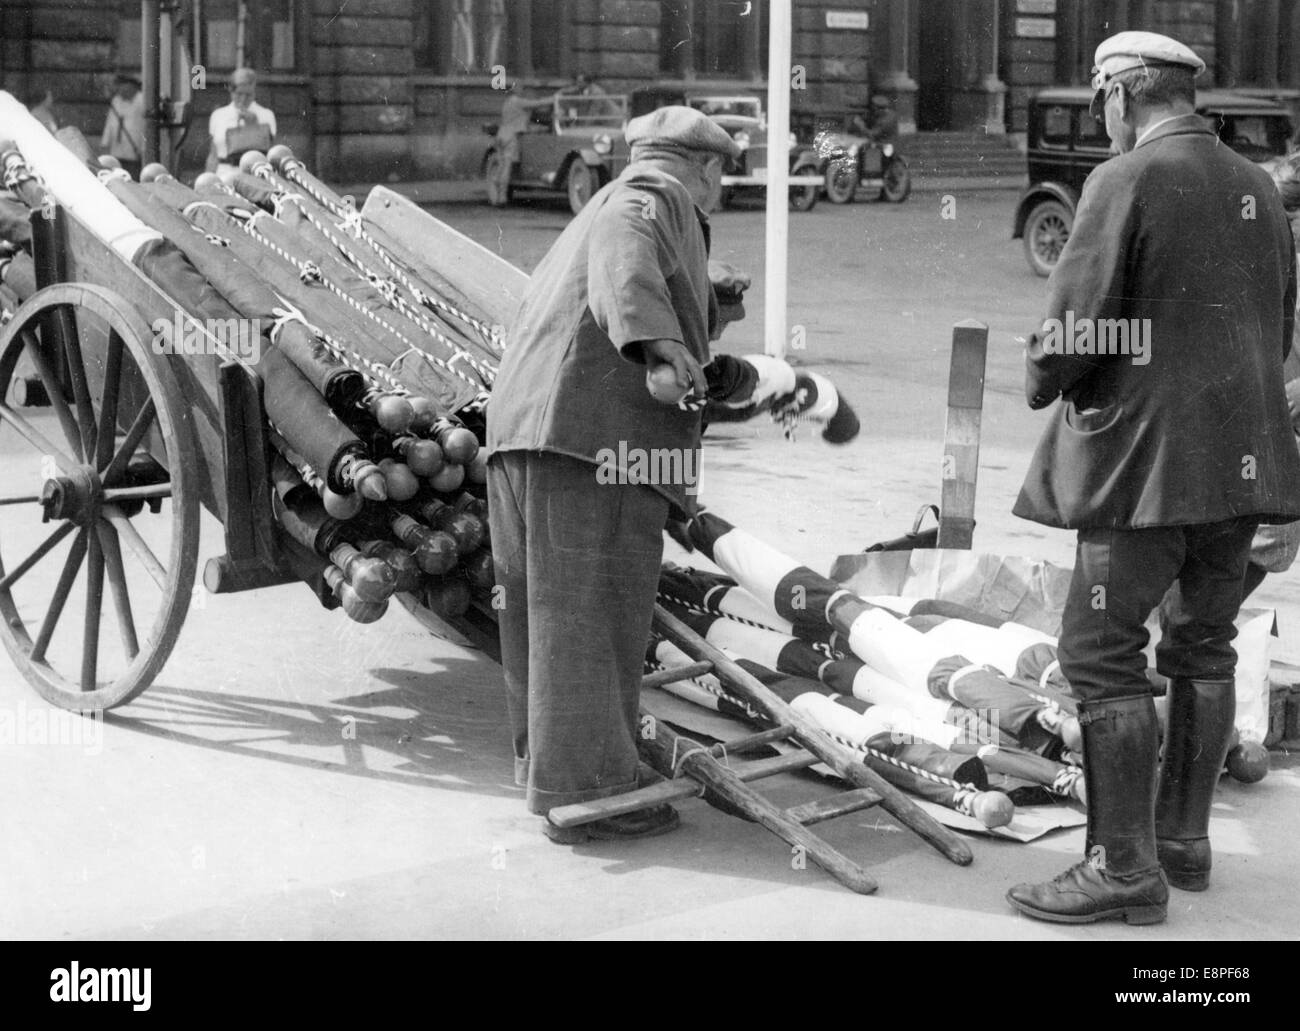 Nuremberg Rally 1933 in Nuremberg, Germany - Flags with swastikas are prepared for use in the streets of the city. (Flaws in quality due to the historic picture copy) Fotoarchiv für Zeitgeschichtee - NO WIRE SERVICE - Stock Photo